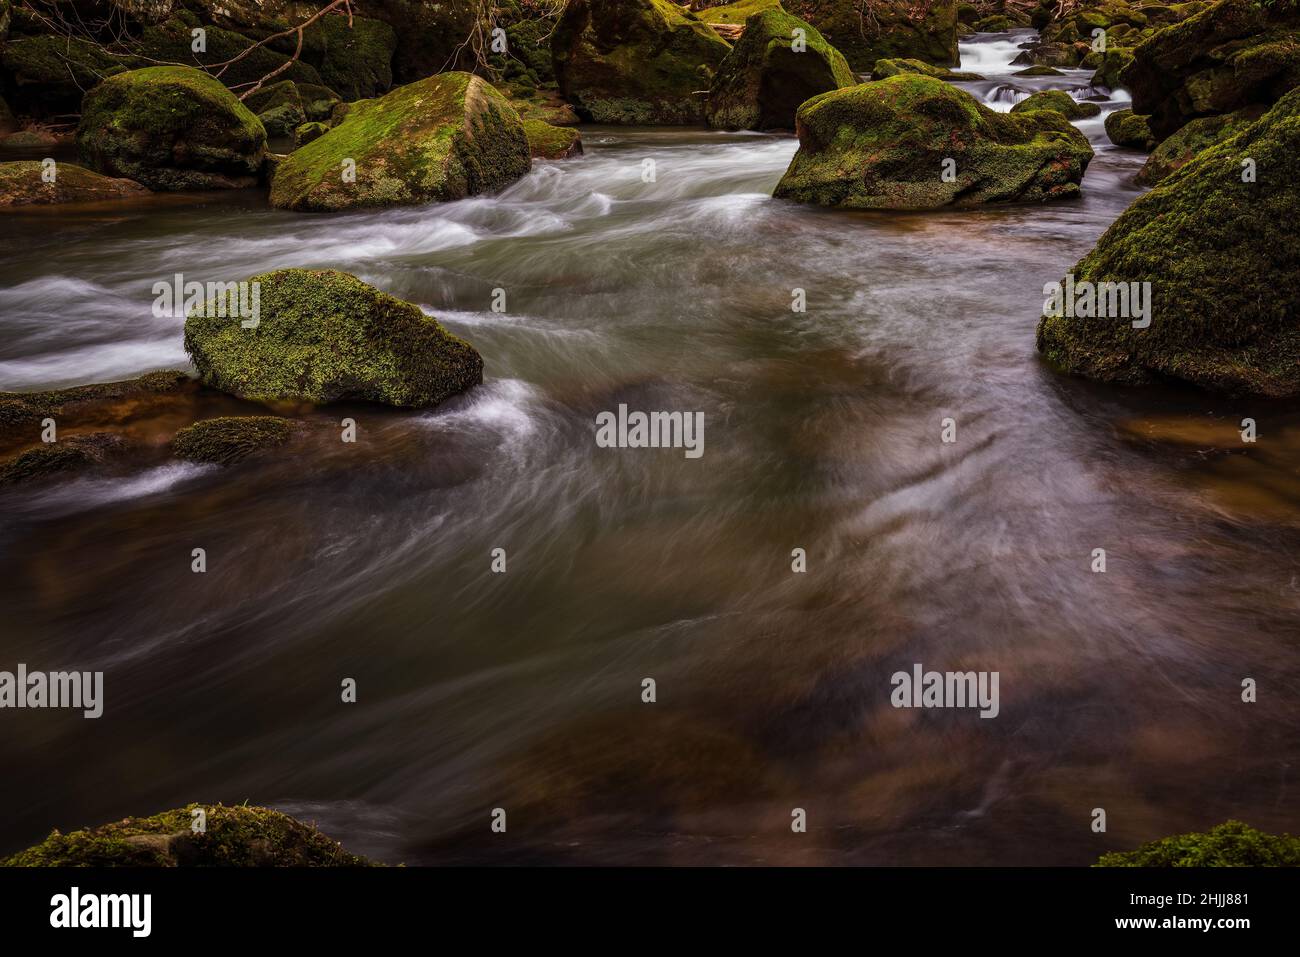 The Irrel Waterfalls in the lower reaches of the Prüm River, Germany. Stock Photo